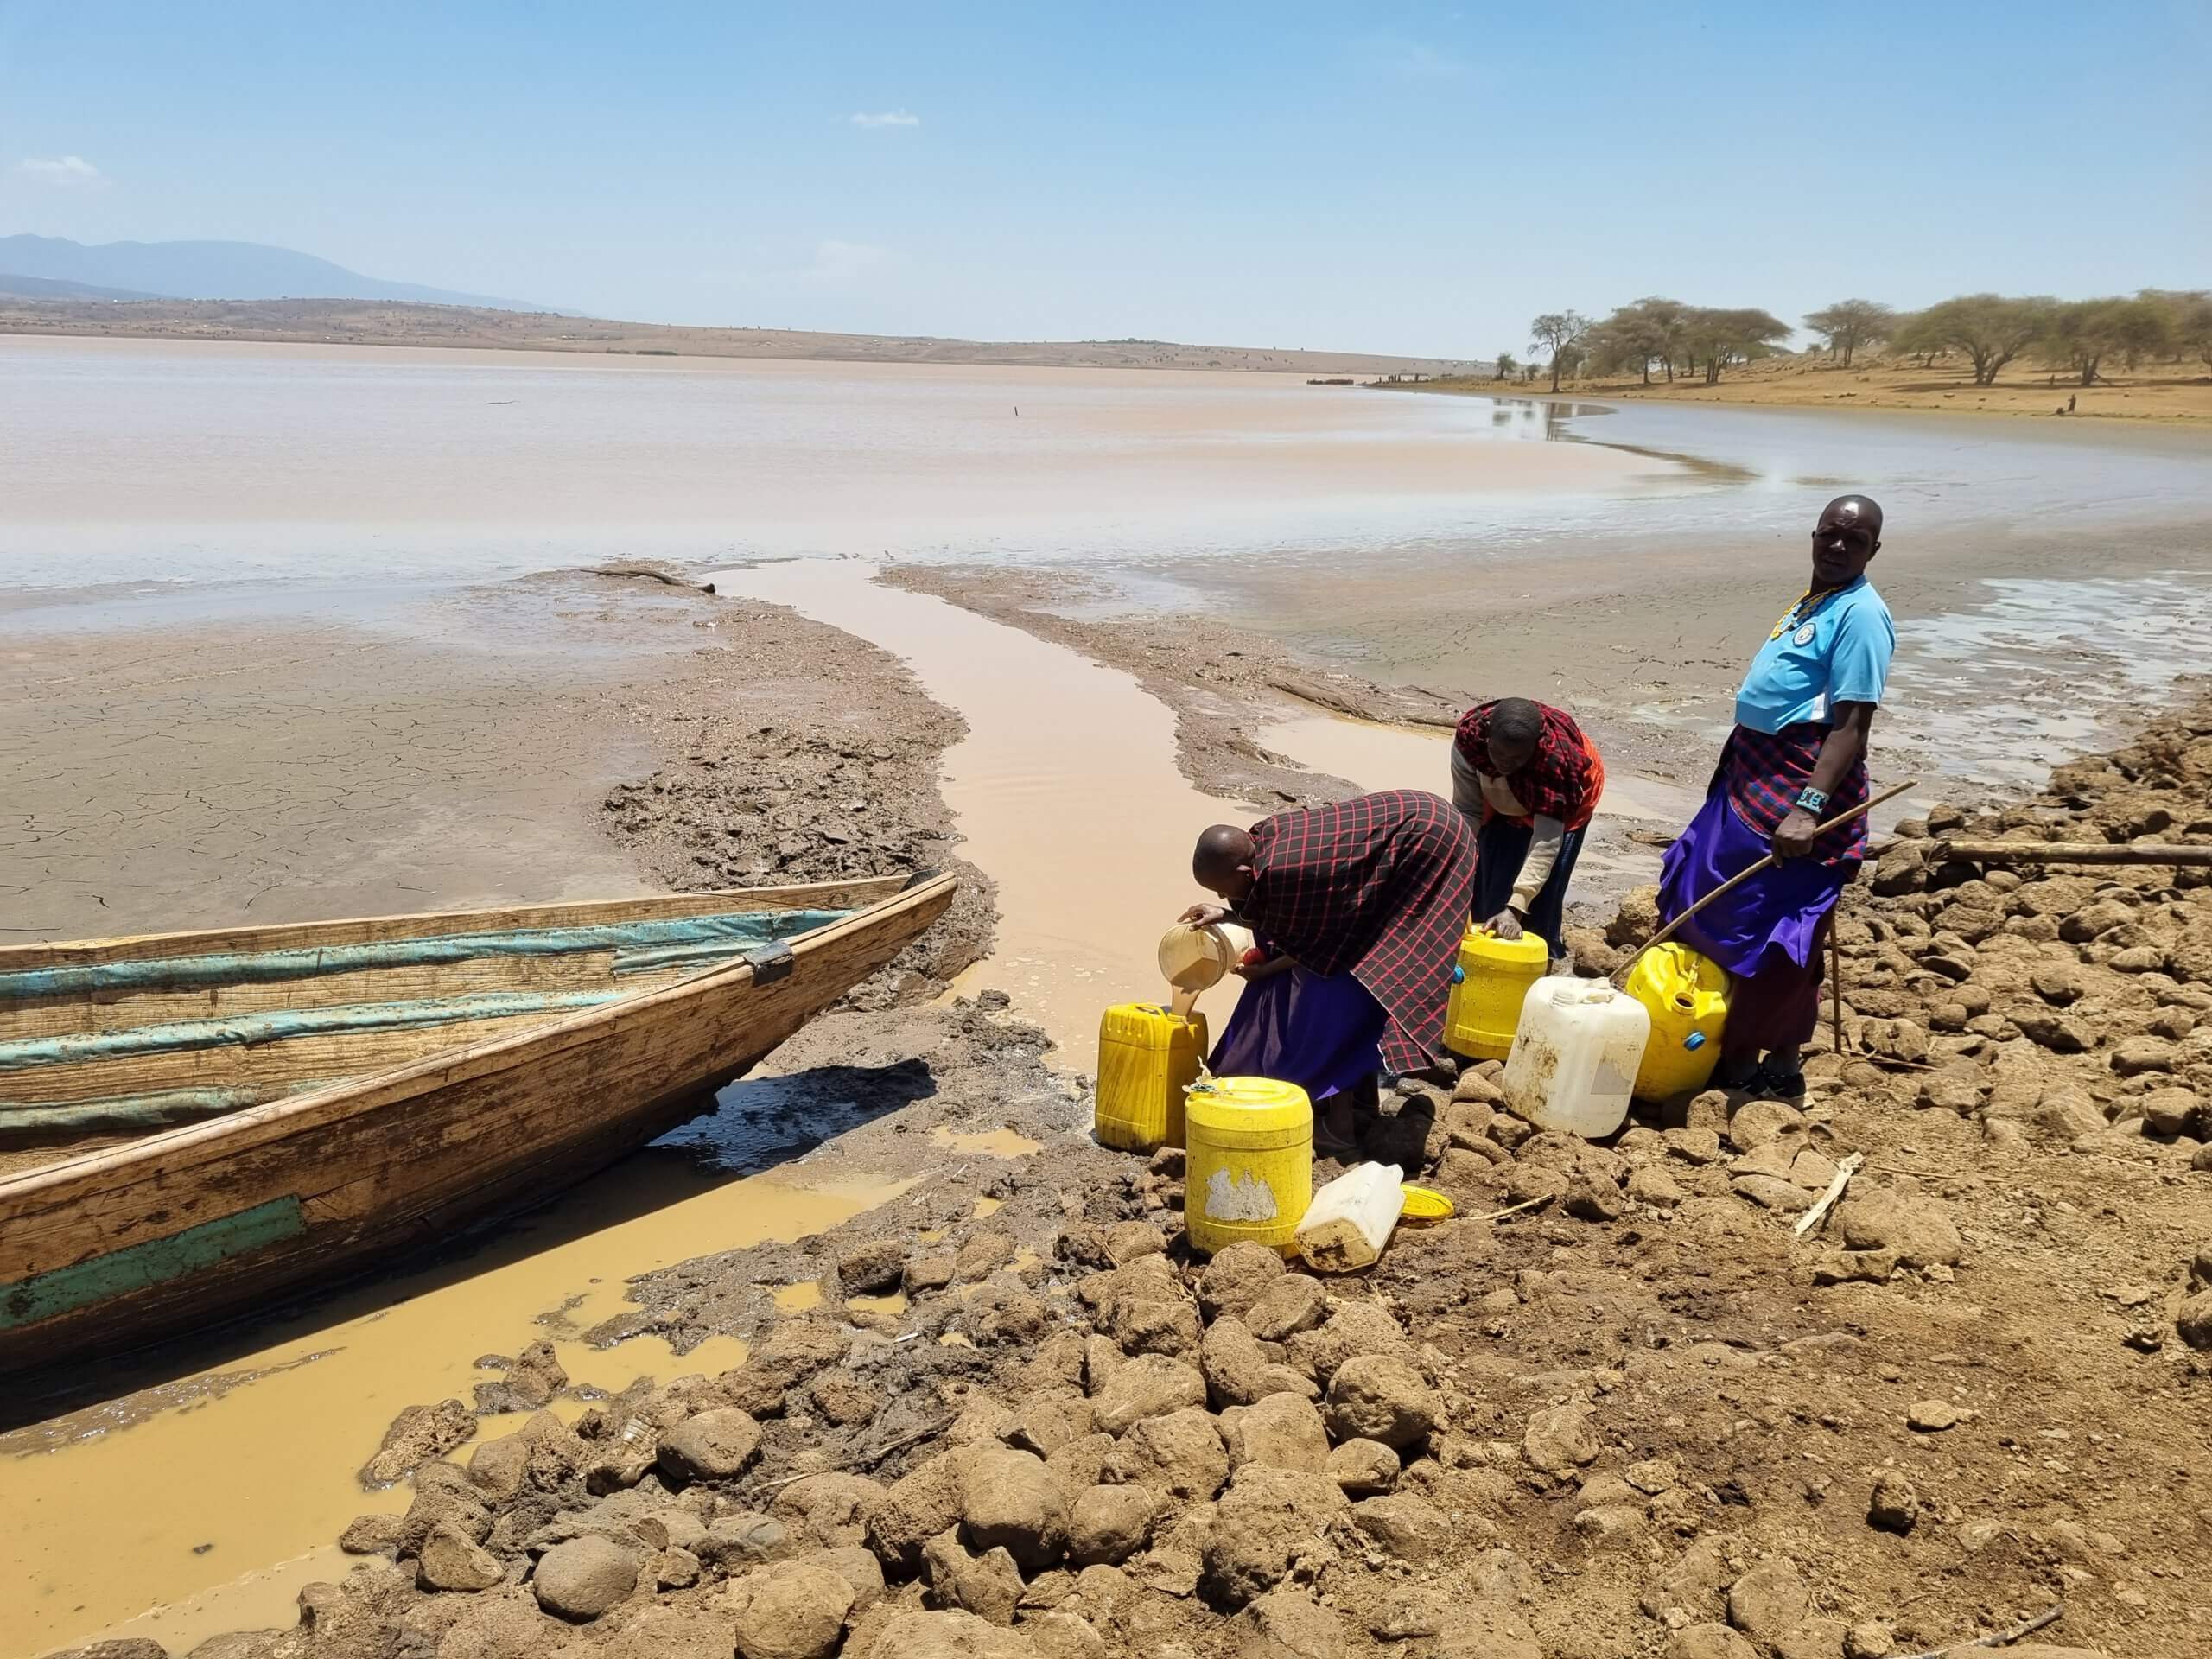 The residents are forced to walk many kilometers to the nearest water source.